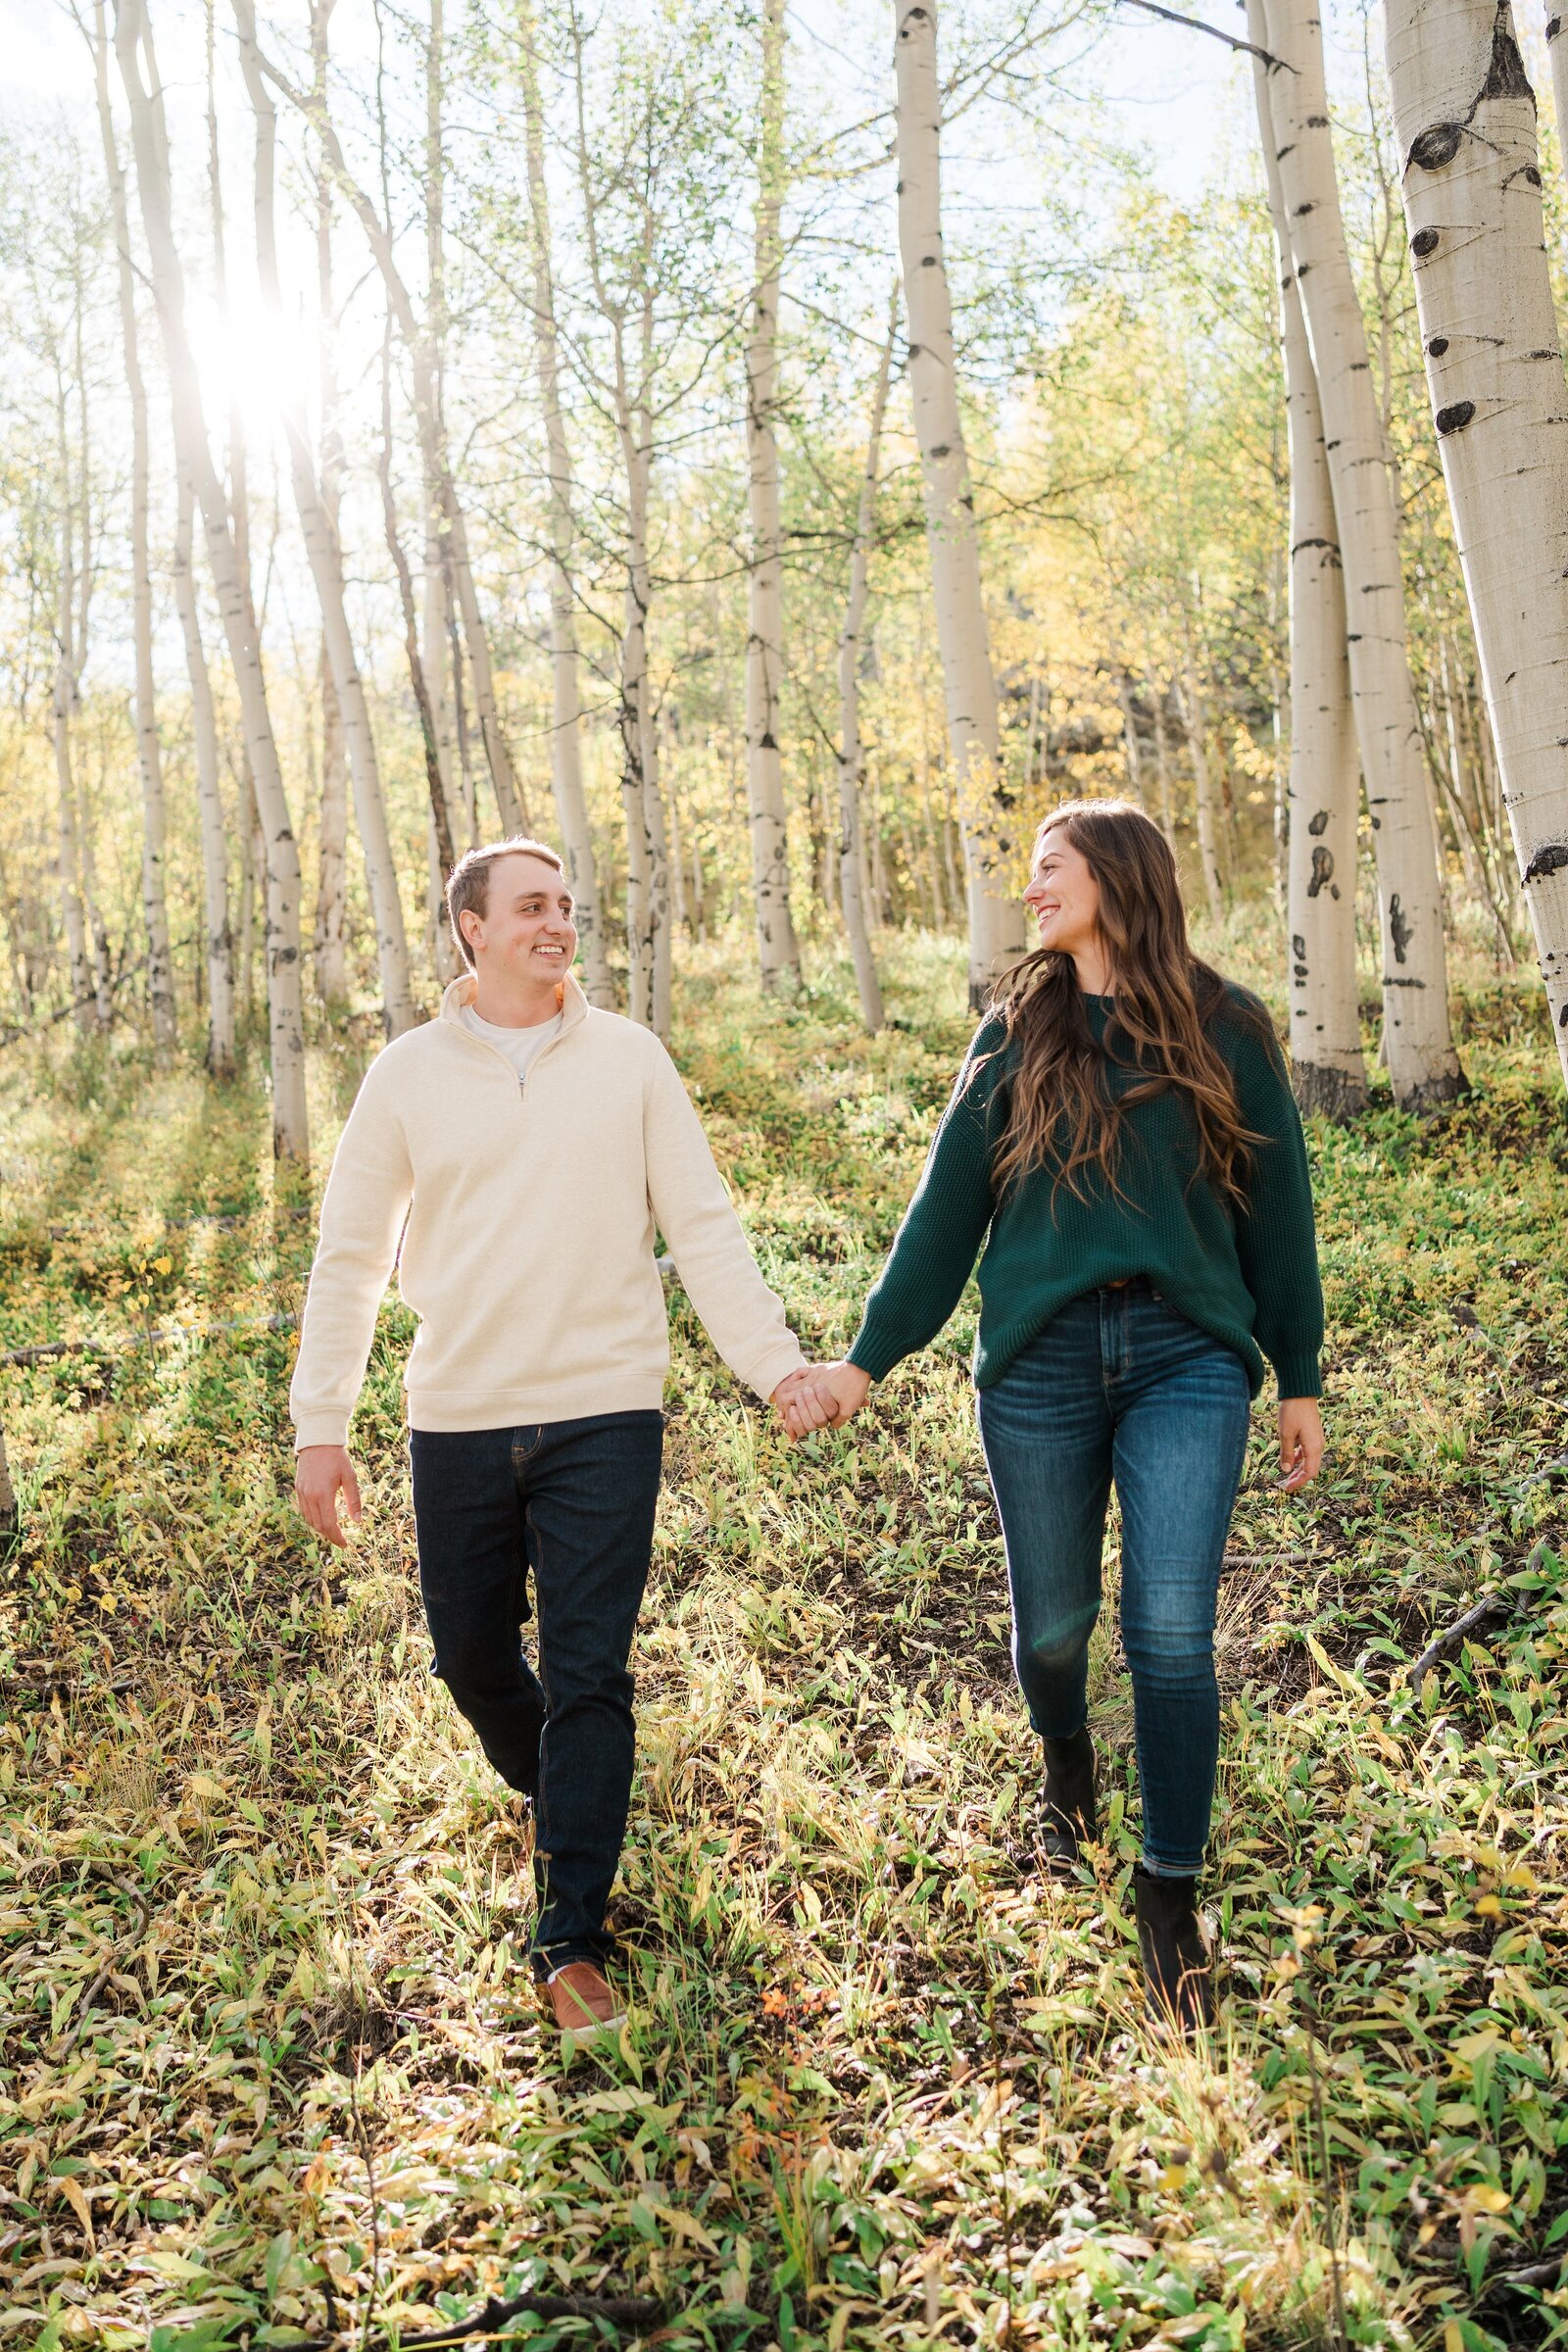 I do" amidst the stunning beauty of Colorado's outdoors with Samantha Immer Photography. Our natural light and scenic backdrop will create breathtaking wedding photos.